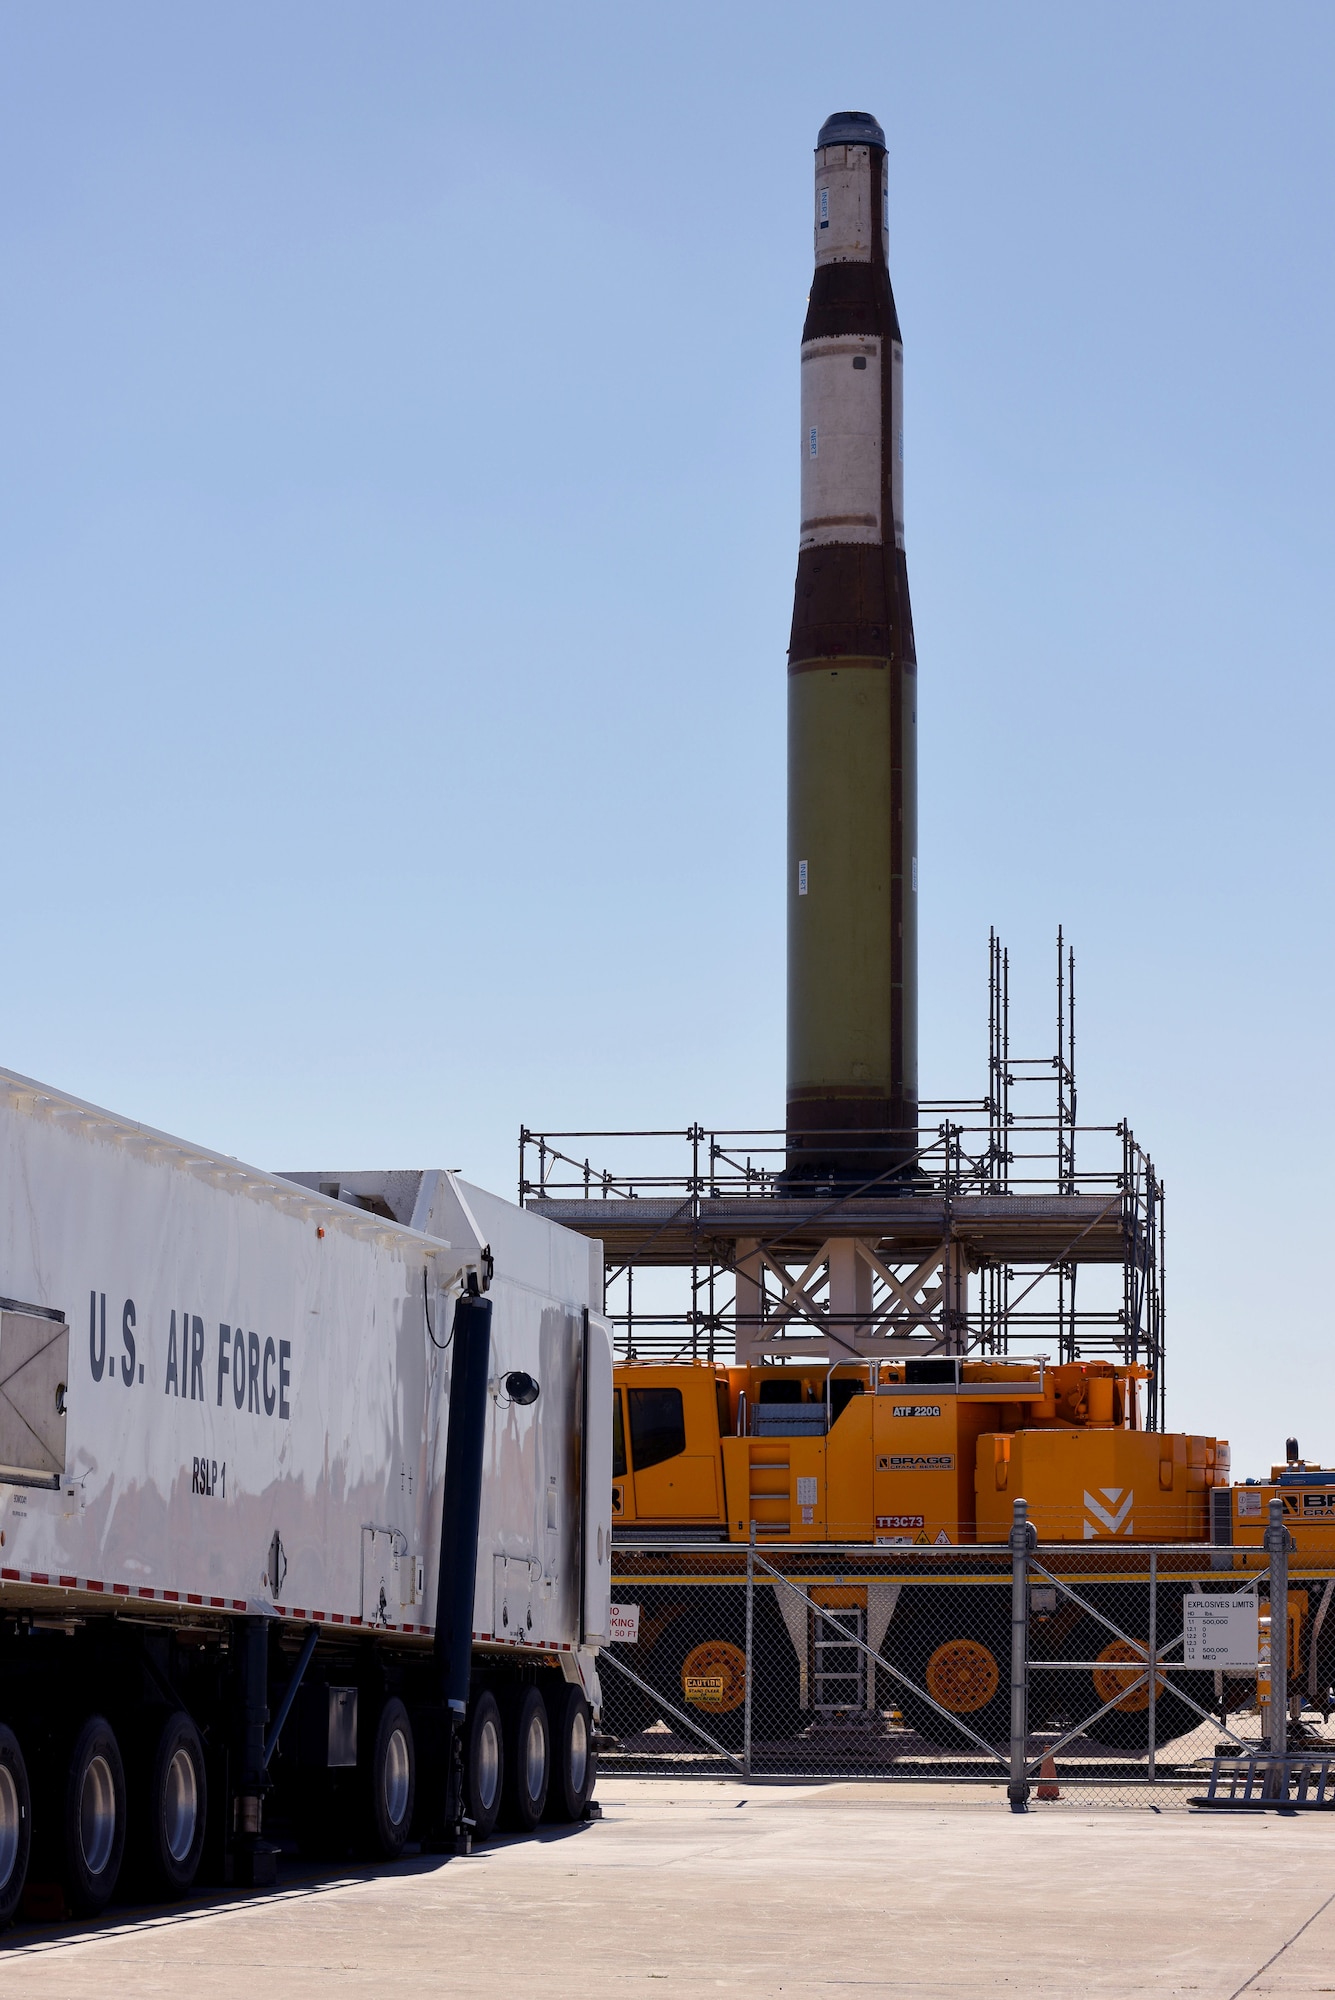 An inert Minuteman II Intercontinental Ballistic Missile stands erect on Test Pad 01, during a training operation, July 22, 2016, Vandenberg Air Force Base, Calif. Also known as Pathfinder operations, the regularly occurring exercise is designed to determine the operational capabilities involved in Intercontinental Ballistic Missile launches, while agencies from a multitude of regions and backgrounds work in cohesion. (U.S. Air Force photo by Staff Sgt. Shane Phipps/Released)